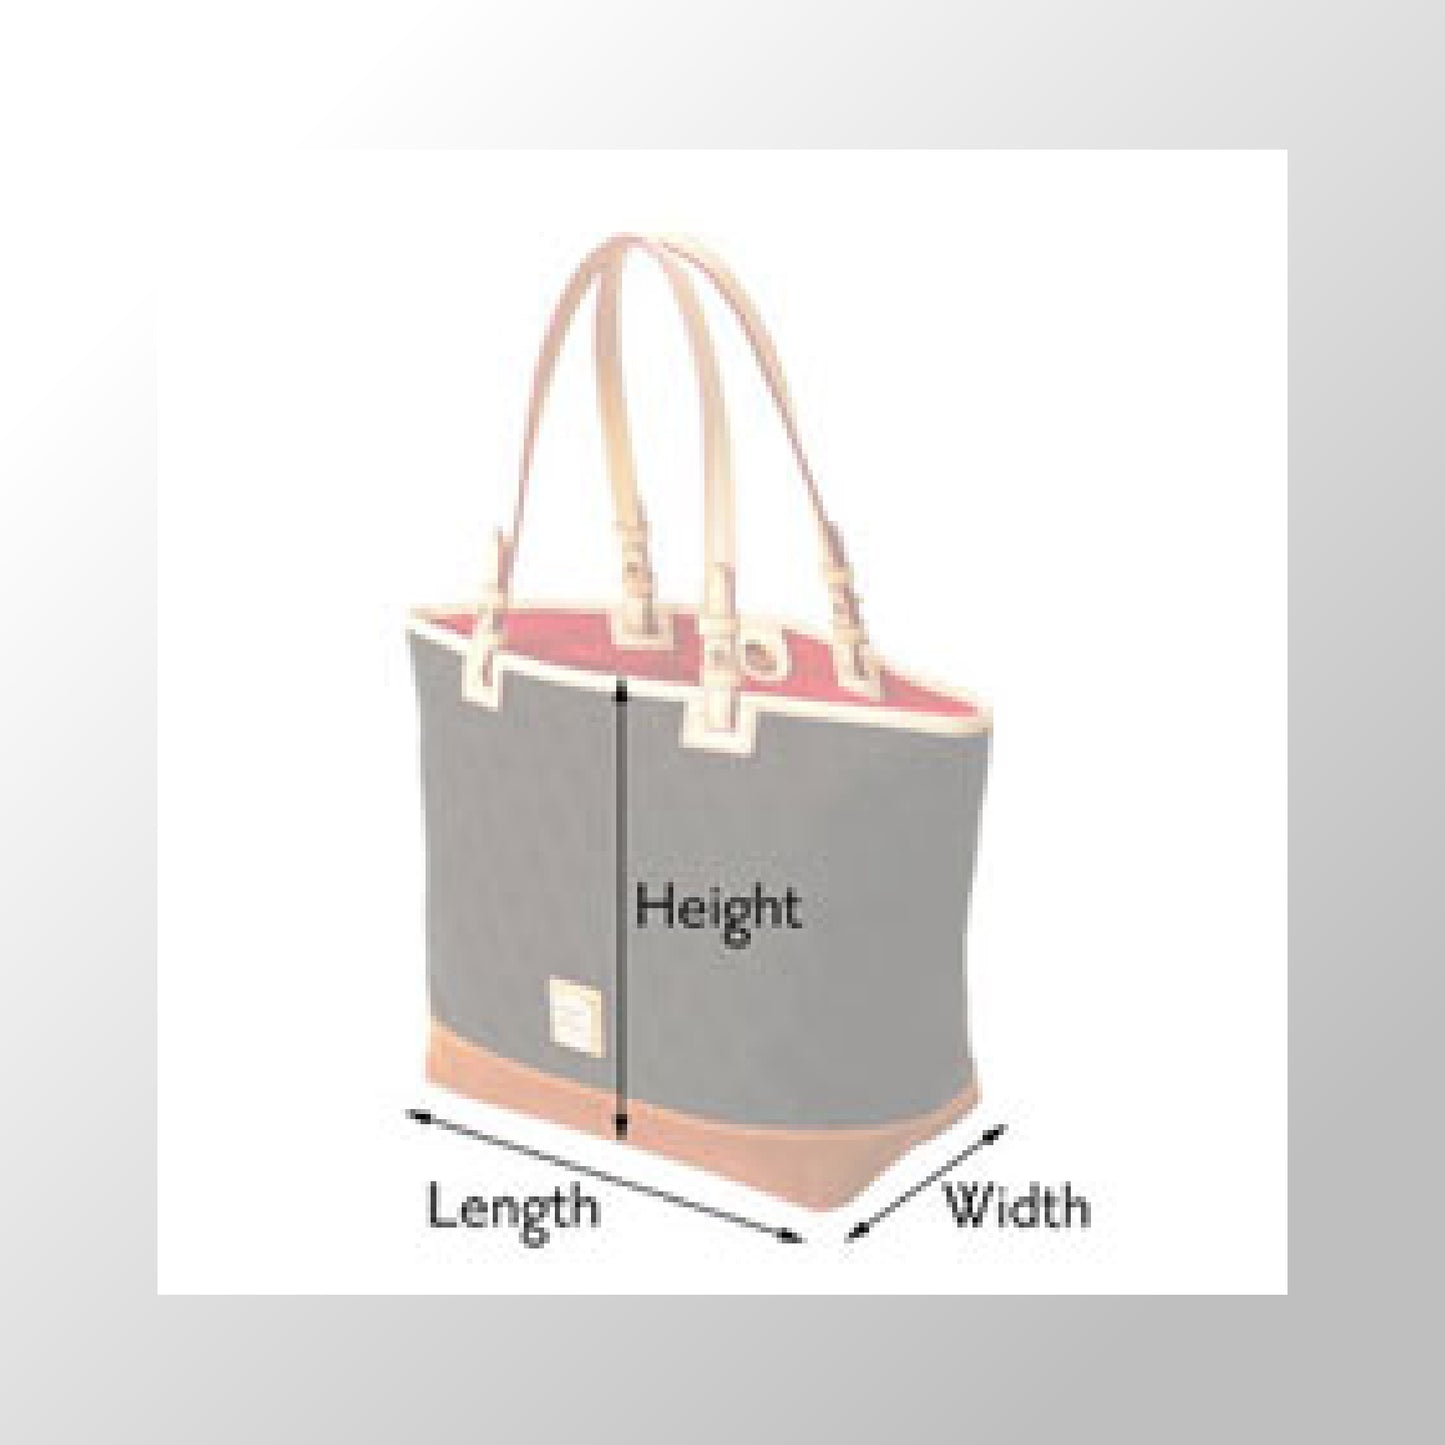 Diagram of how to measure our tote